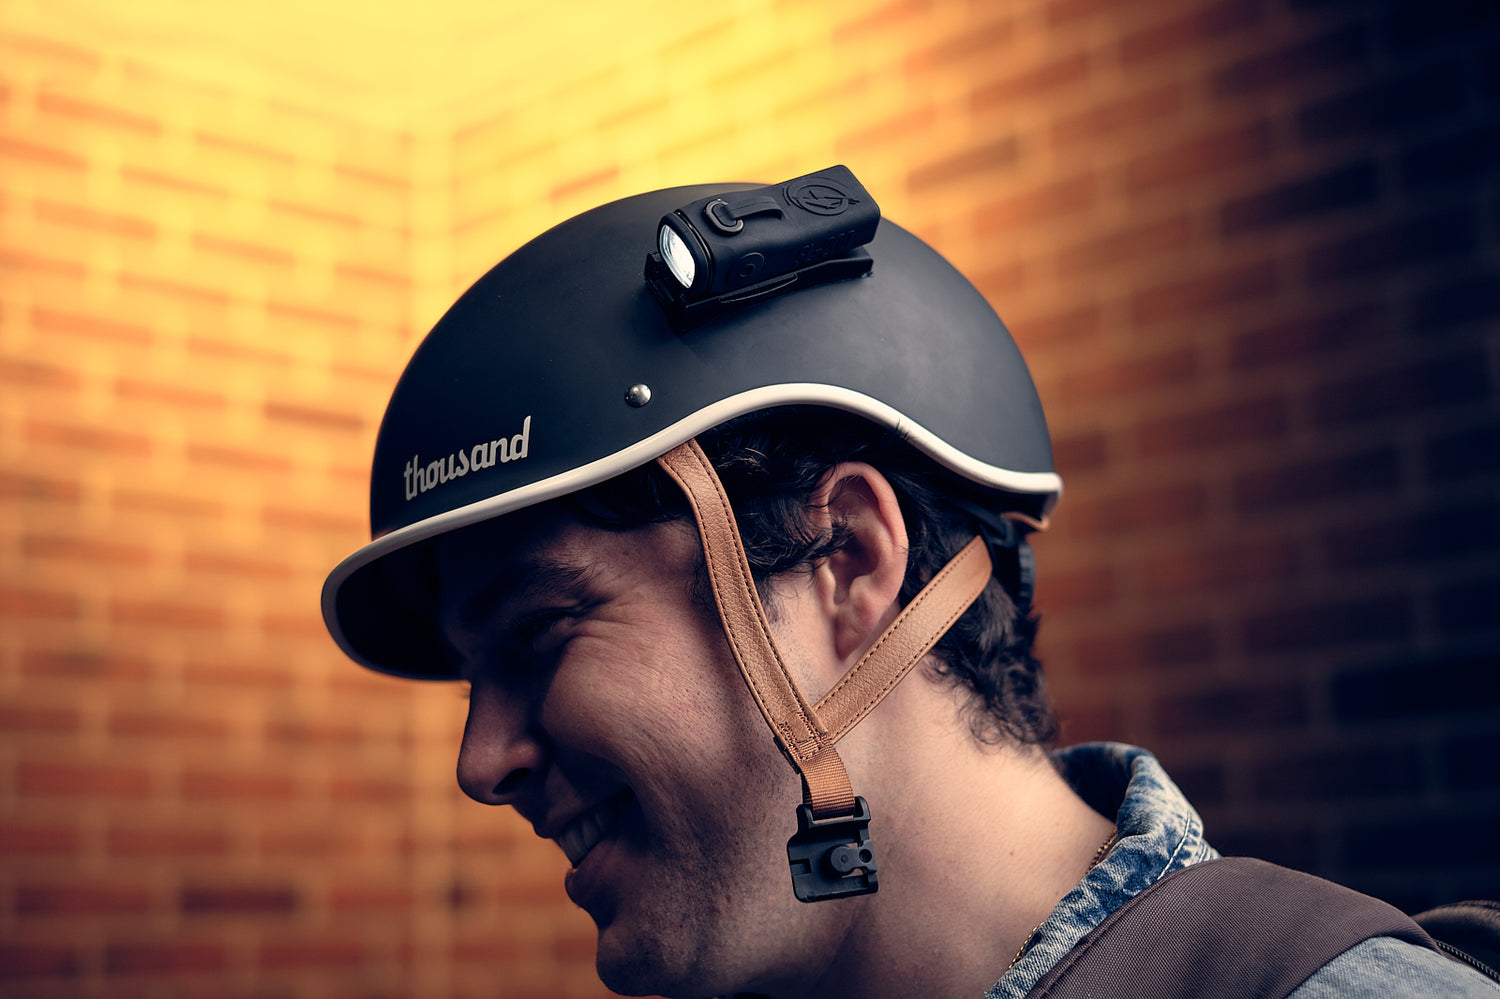 Best Lights for Thousand Helmets - Attachable, Mountable Helmet Lights for Riding at Night